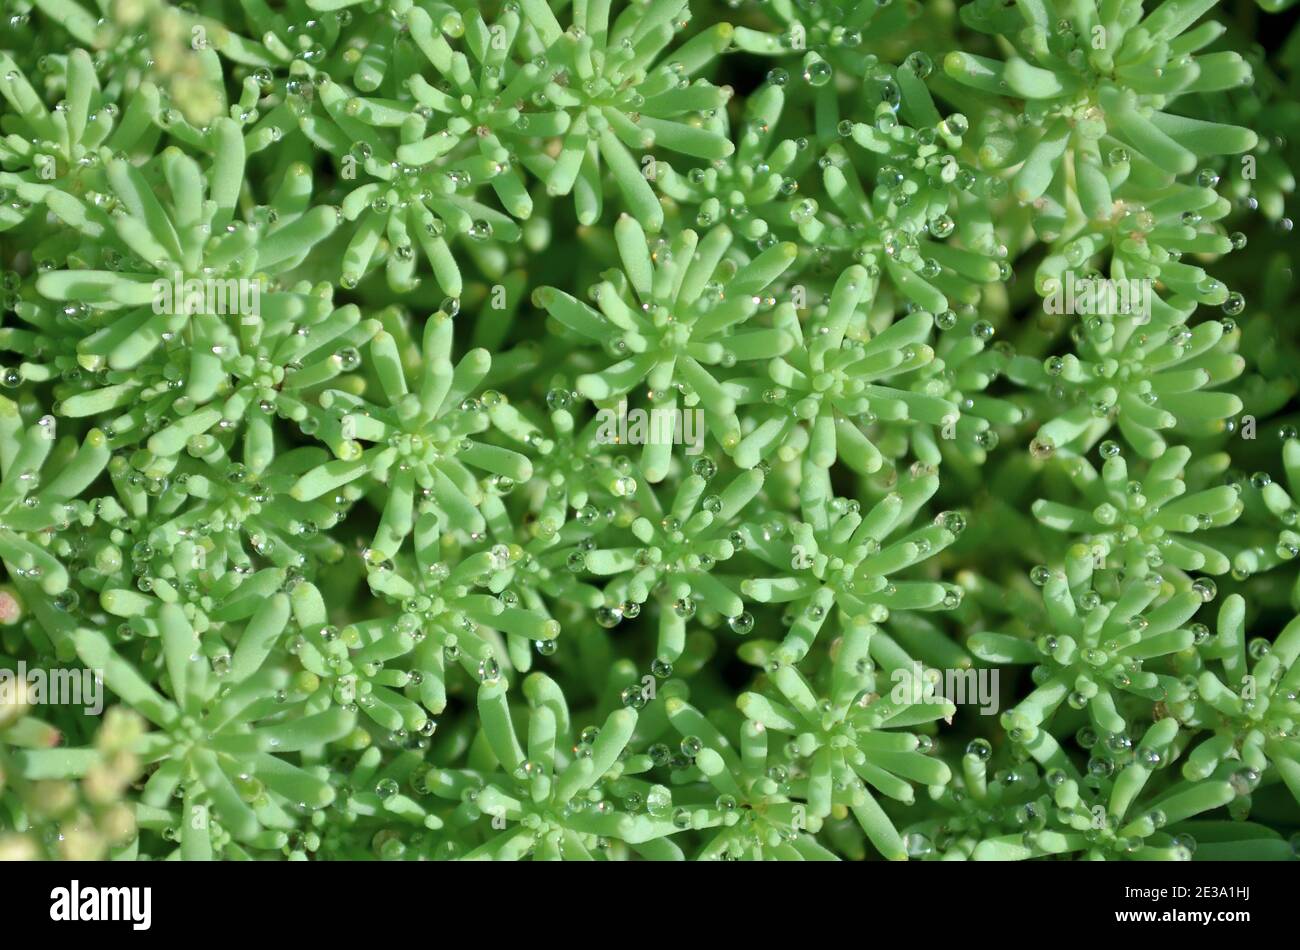 Succulent plant sedum or stonecrop as a nature green background close-up, top view. Stock Photo